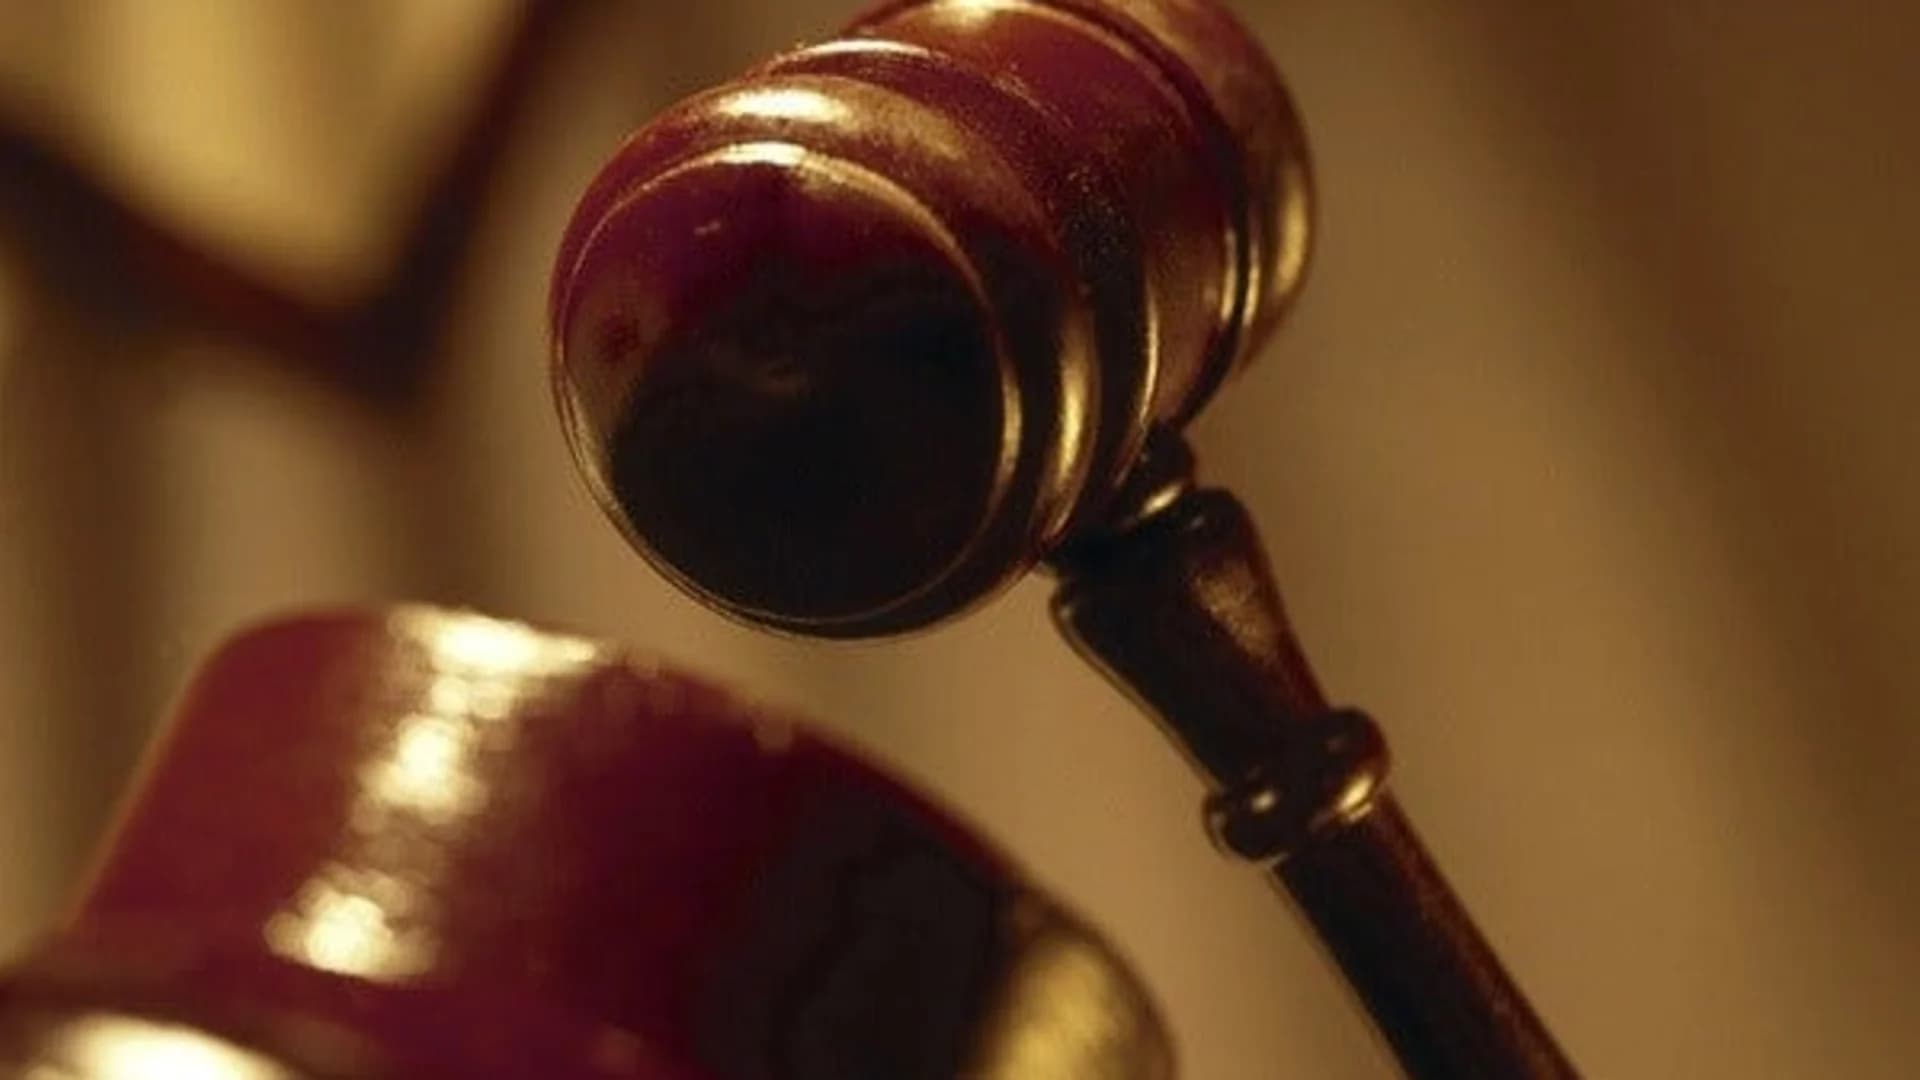 Man sues parents for getting rid of his vast porn collection; seeking $87,000